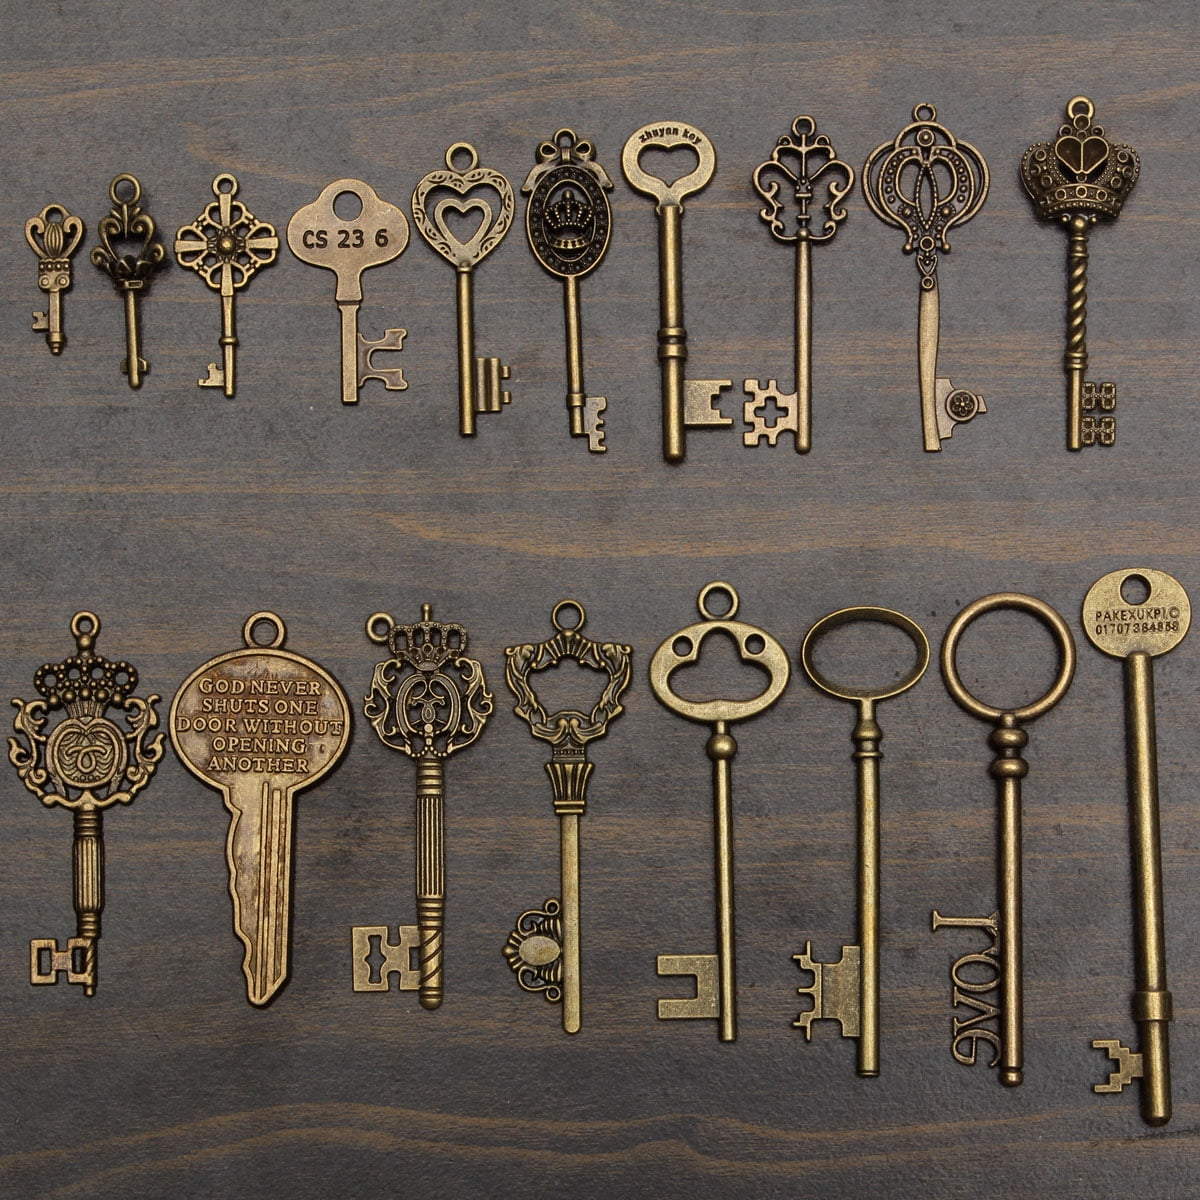 New Gold Vintage Old Look Skeleton Keys Key Estate Charms Jewelry Steampunk Wedding Escort Beads Supplies Pendant Vintage Antique Ring Chain